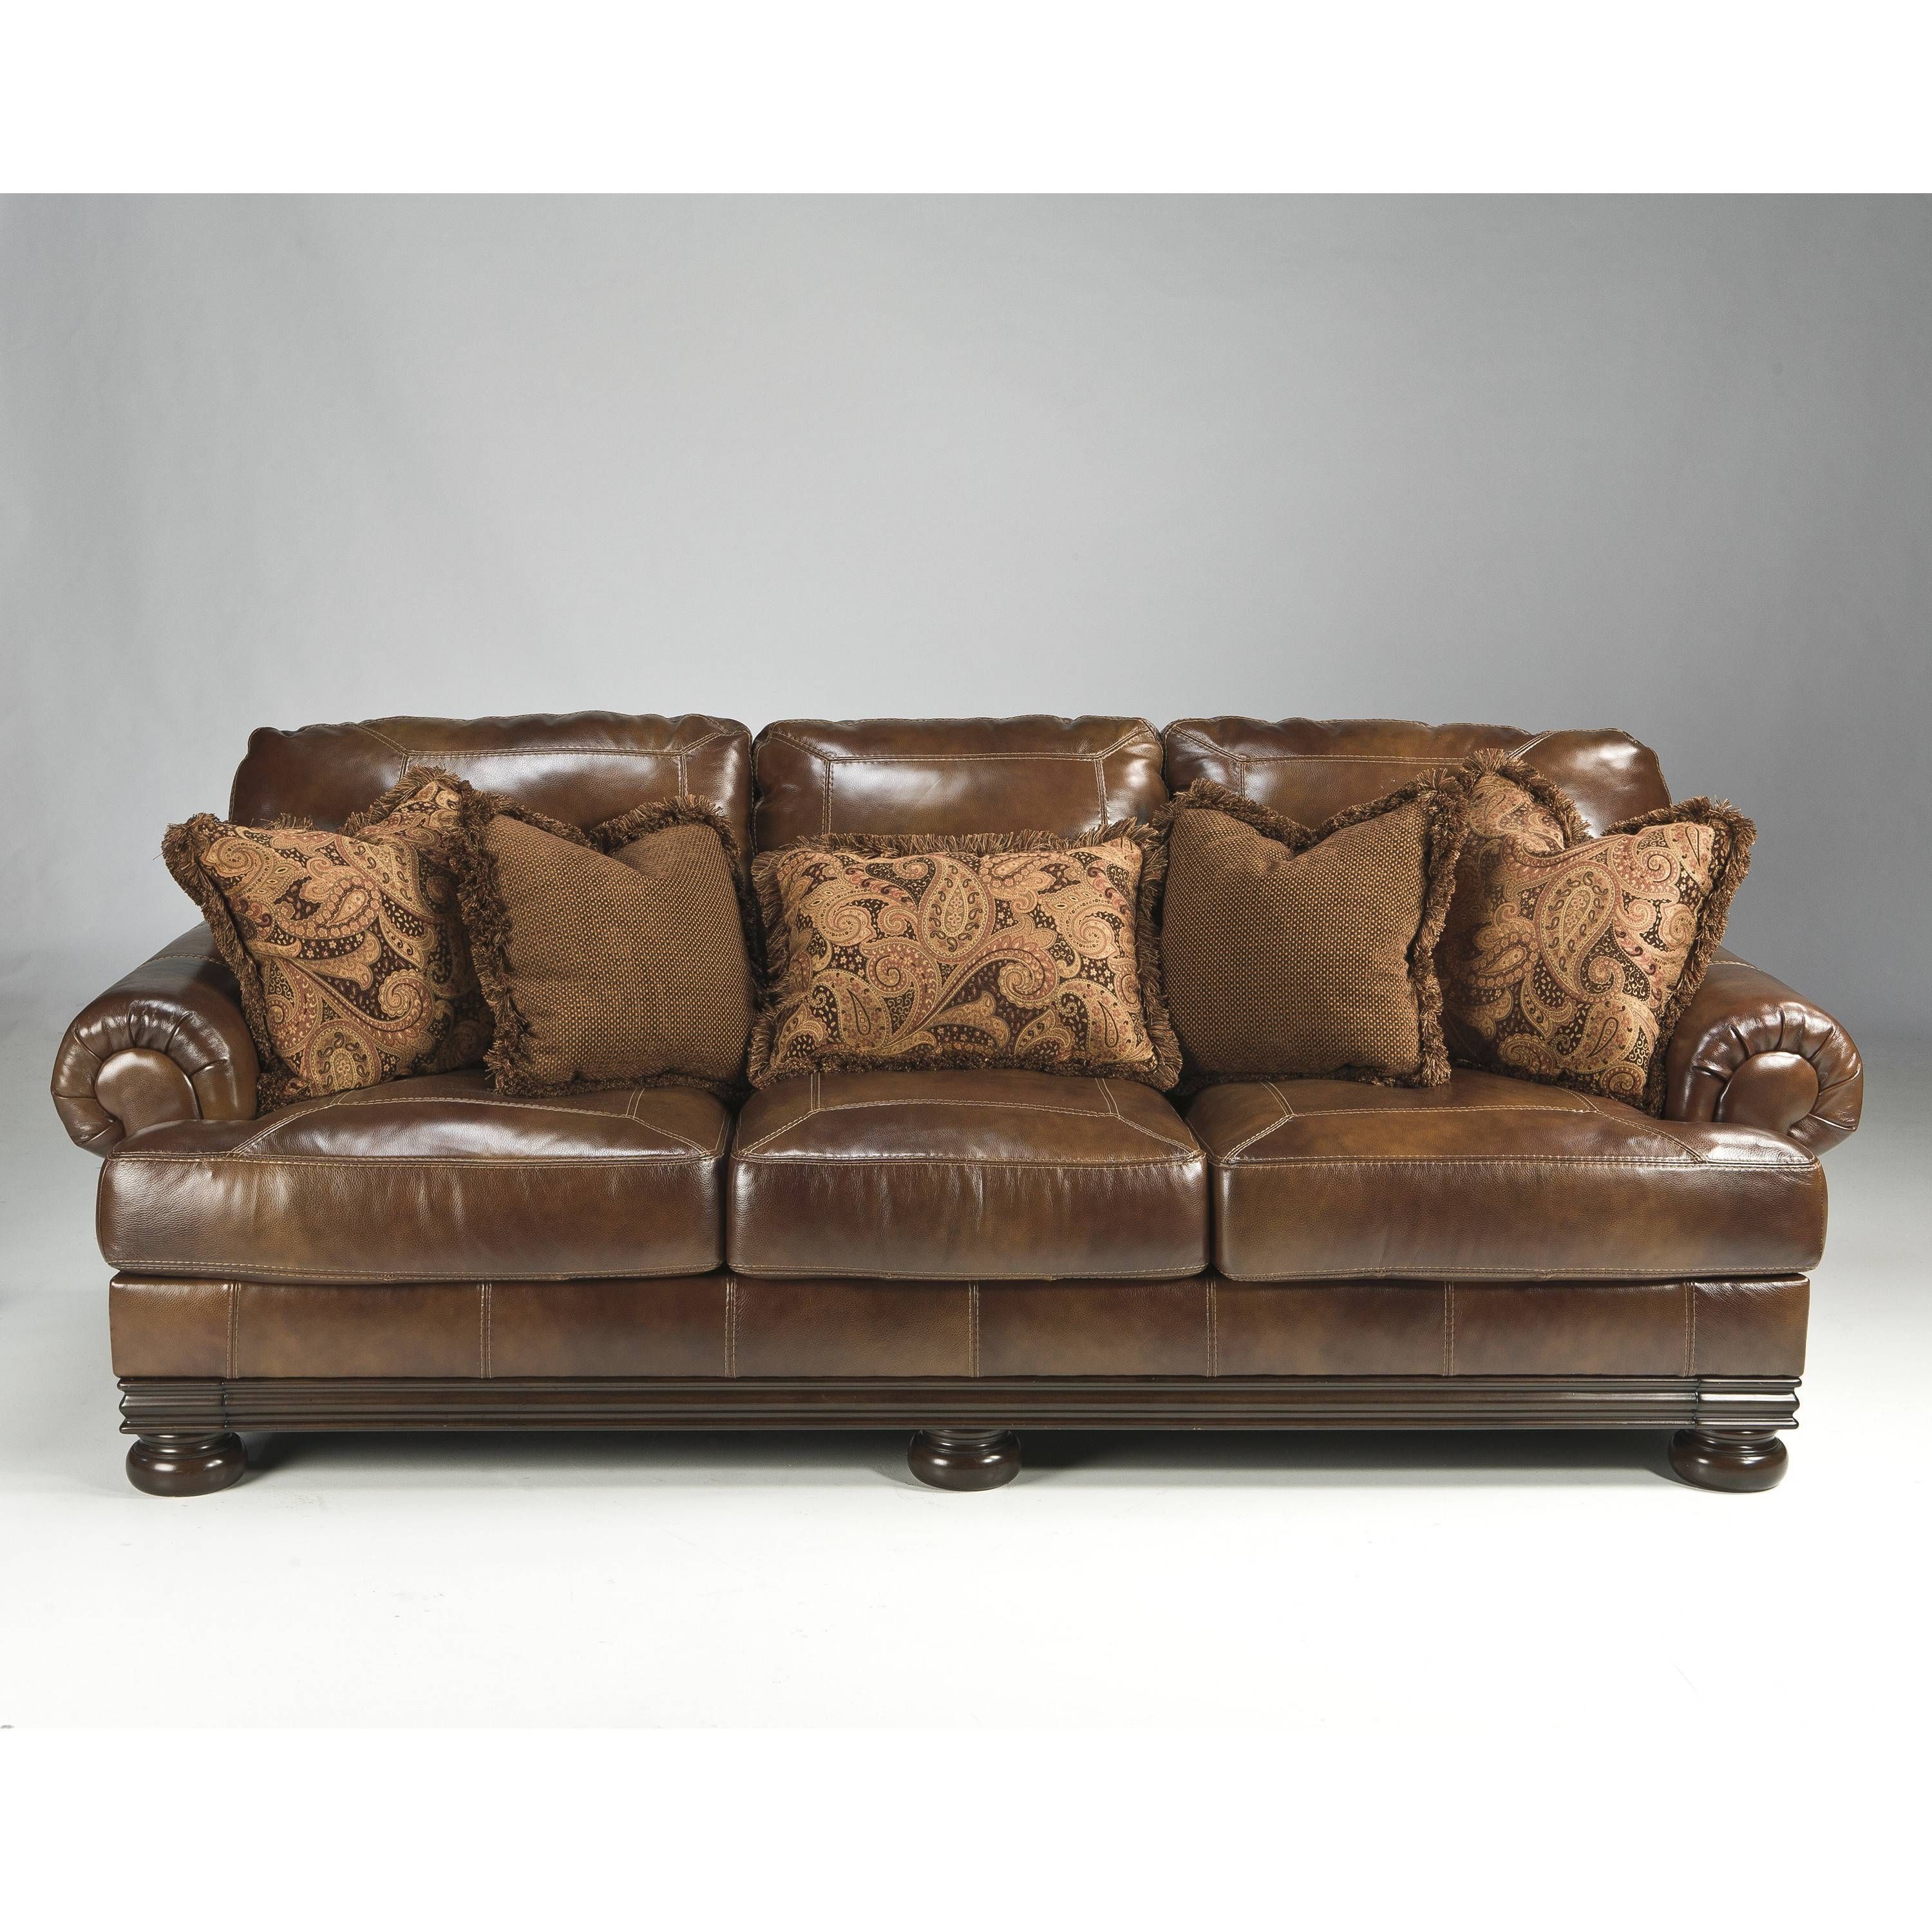 Awesome Camelback Leather Sofa Time Out 80 With Additional Modern With Camelback Leather Sofas (View 9 of 15)